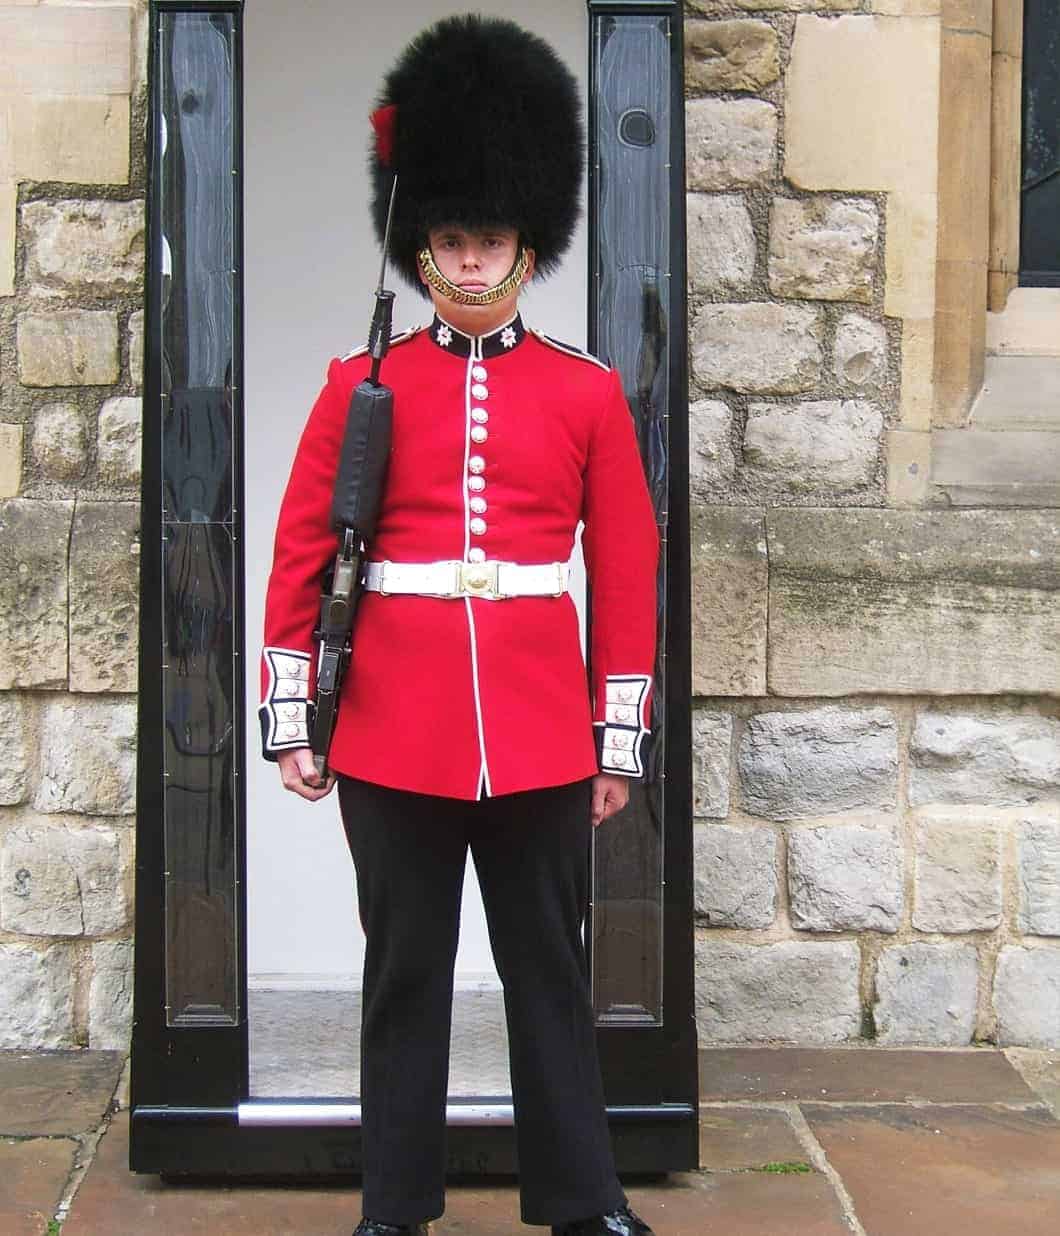 When is Changing the Guard in London?